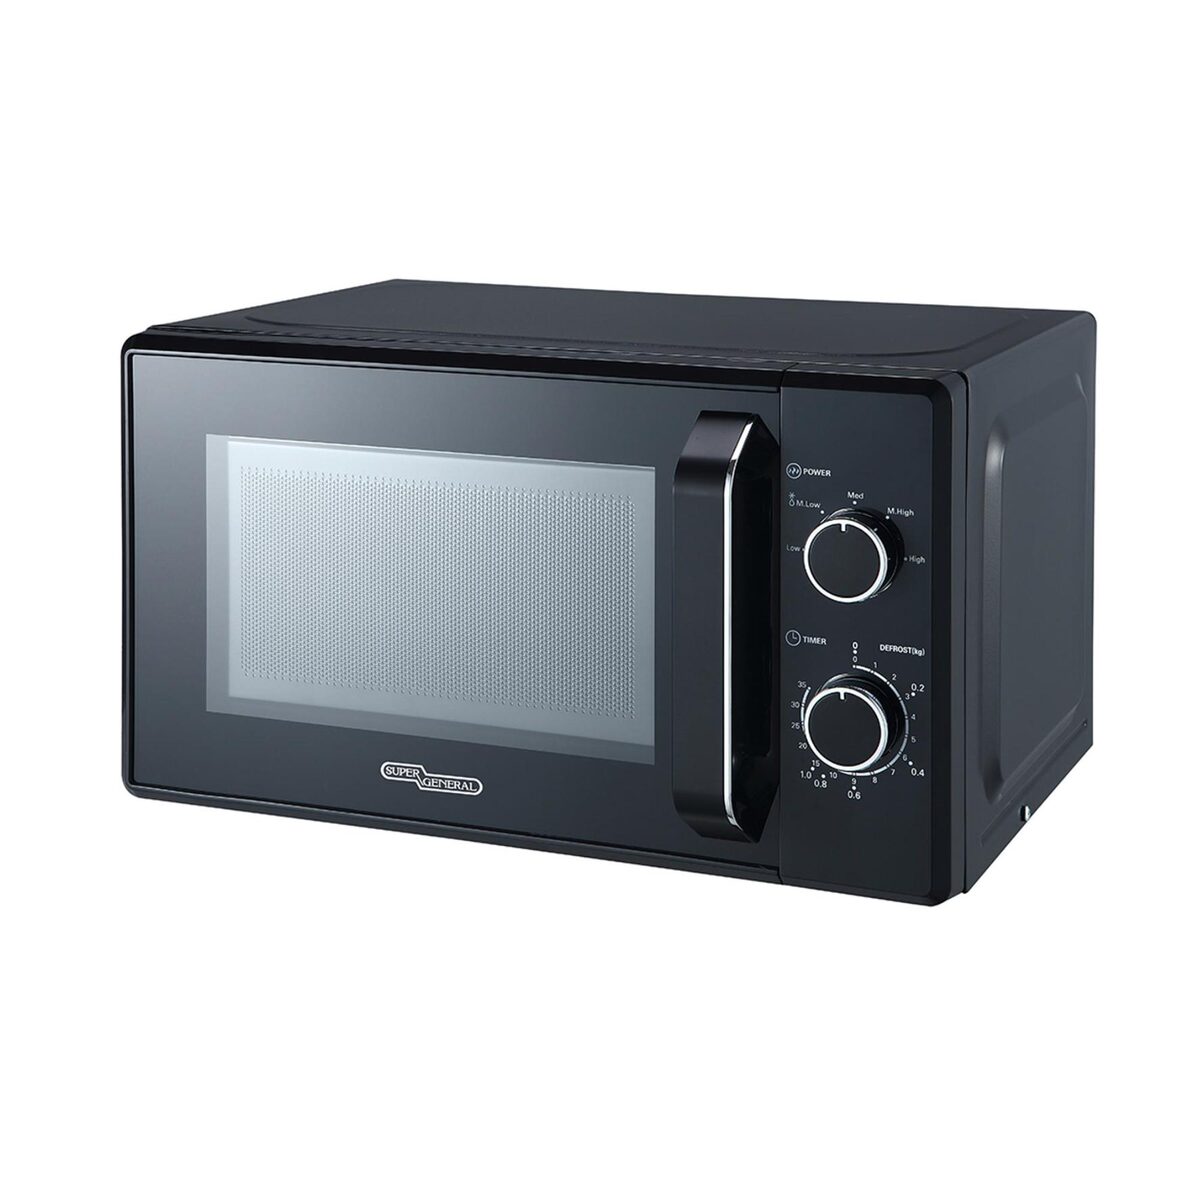 Super General Microwave Oven SGMM921NHB 20Ltr